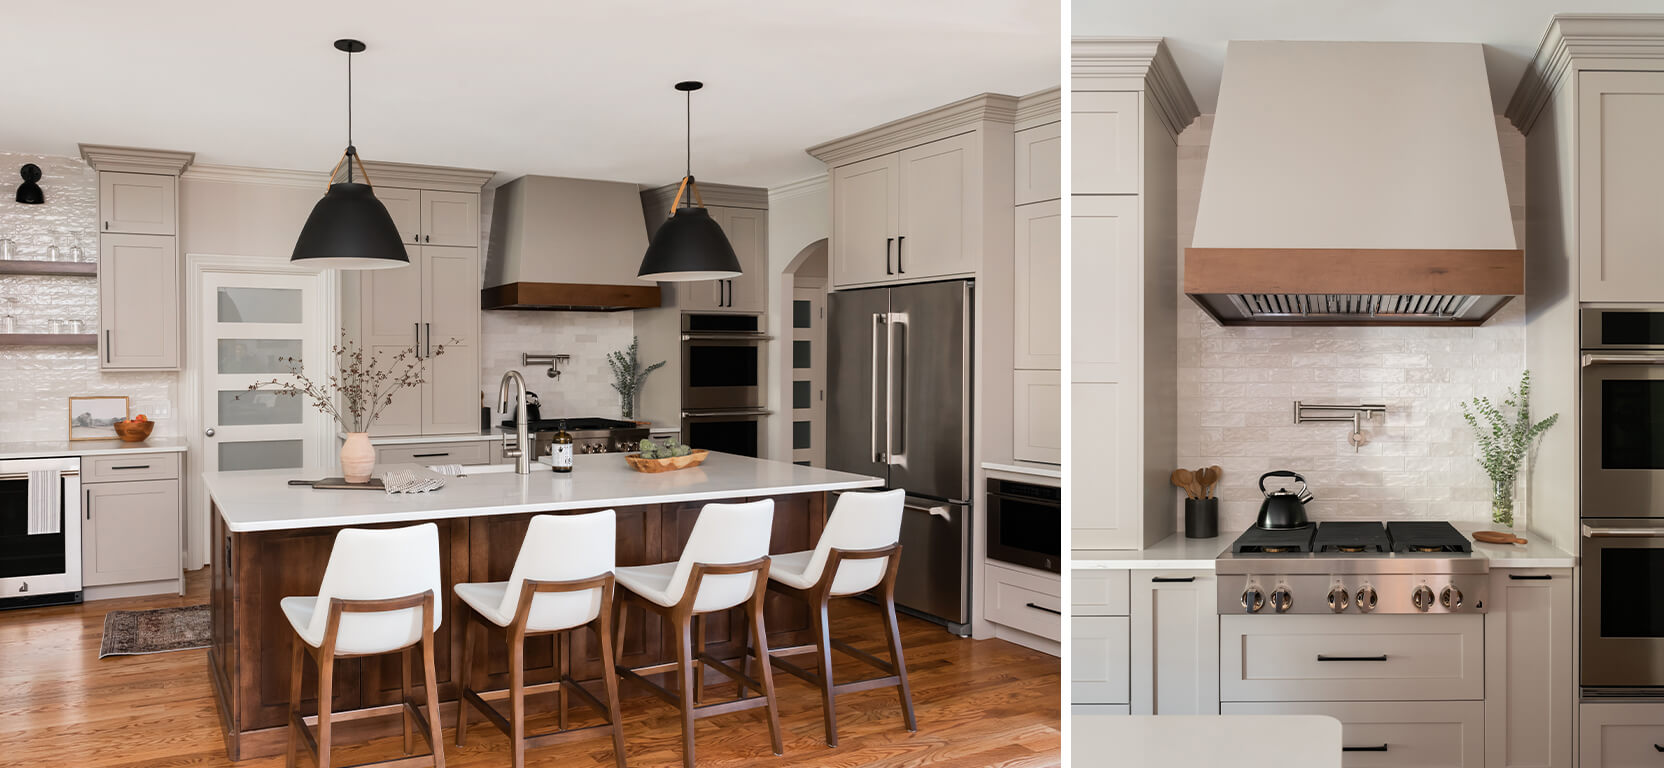 Modern kitchen with ceiling-height cabinets painted in a mid-tone gray-beige color with dark wood and matte black accents and white dining chairs at the large kitchen island. Shot of modern gas range top with black tea kettle, tiled backsplash and gray-beige cabinets and hood.